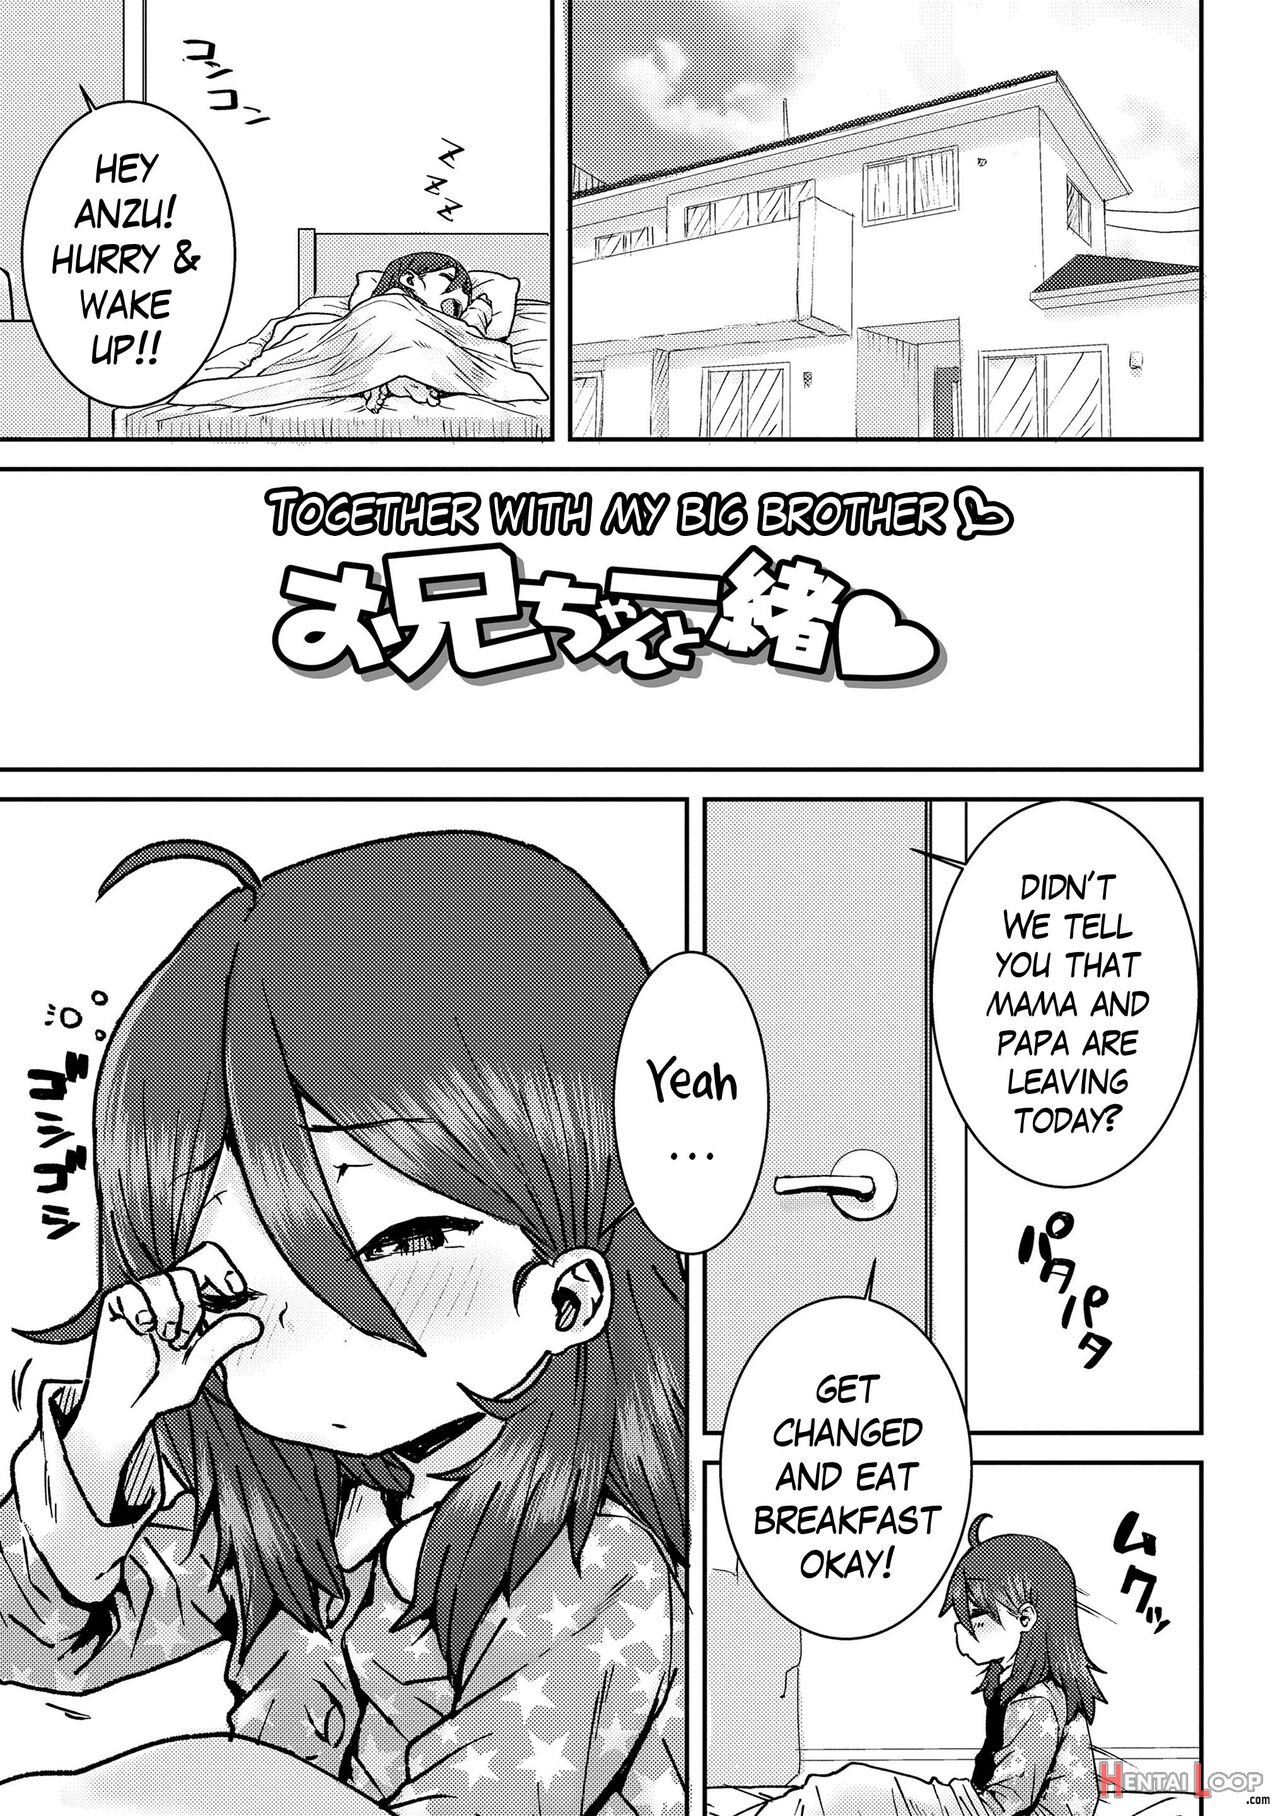 Onii-chan To Issho ♡ page 1